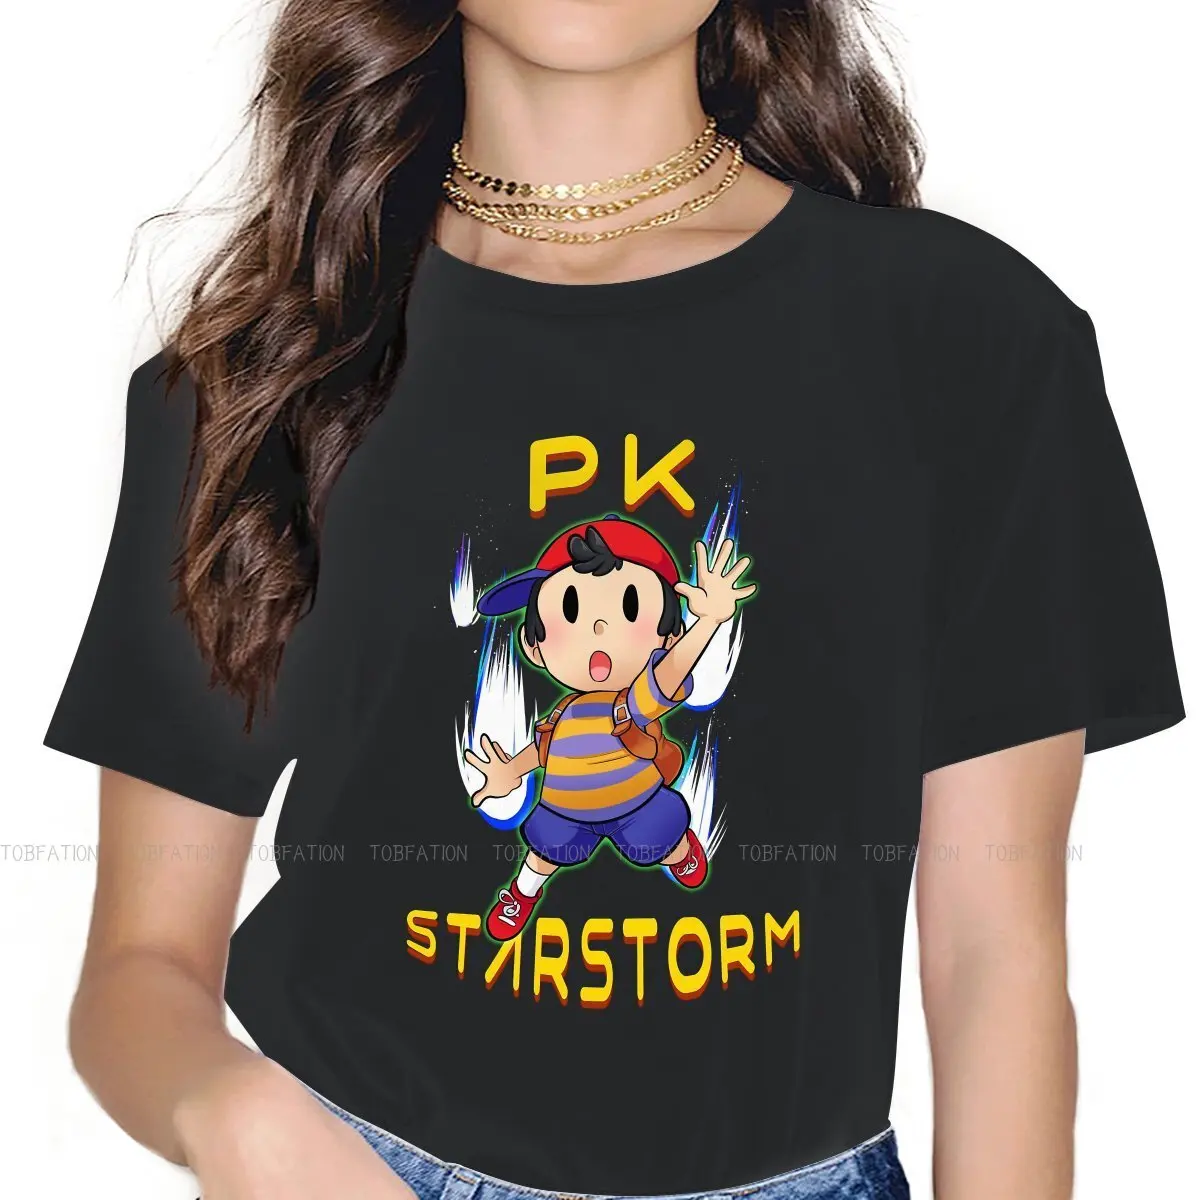 

Earthbound MOTHER RPG Game TShirt for Woman Girl PK Starstorm 4XL Leisure Tee T Shirt Novelty Fluffy